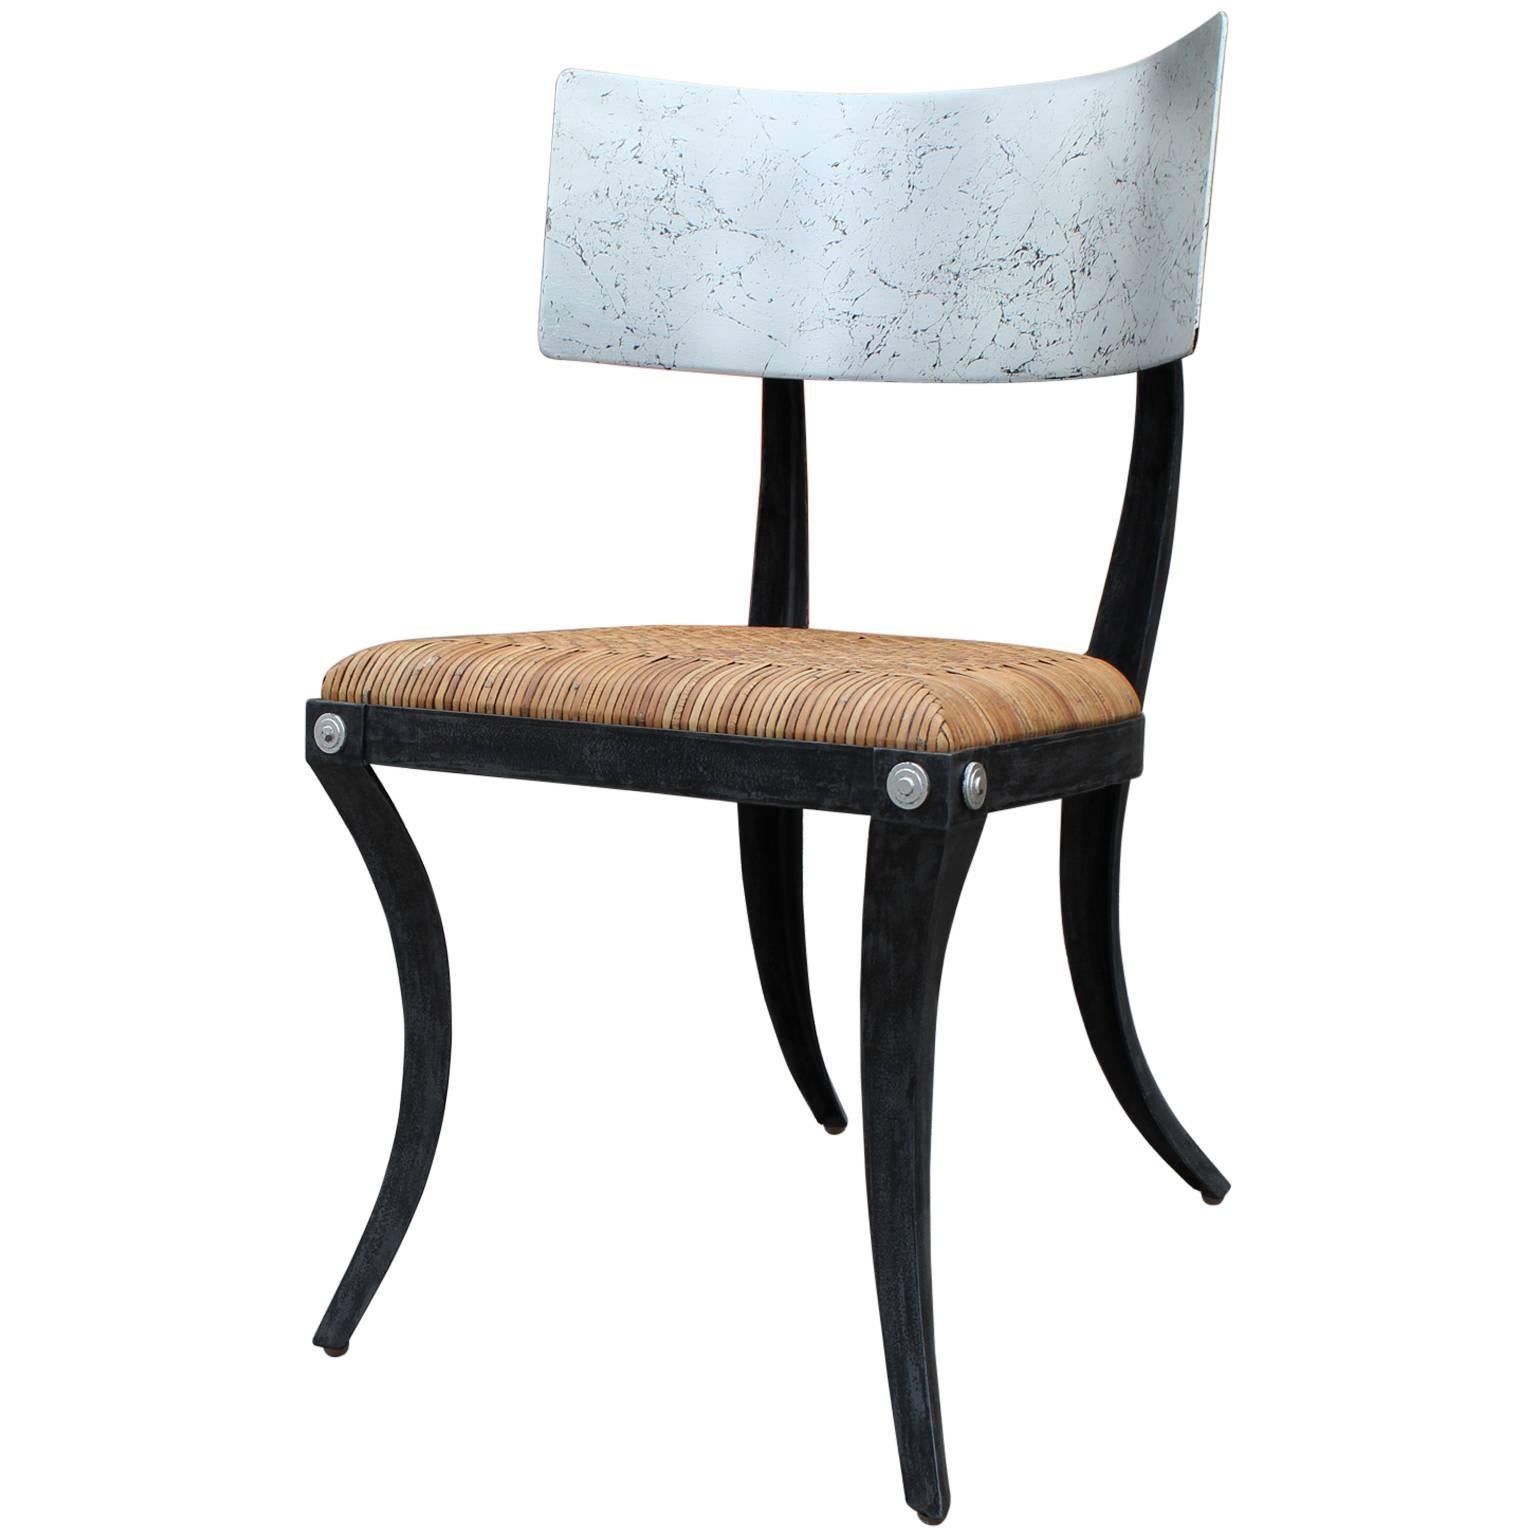 Modern Silver Leaf Steel Klismos Chair with Woven Cane Seat and Black Frame